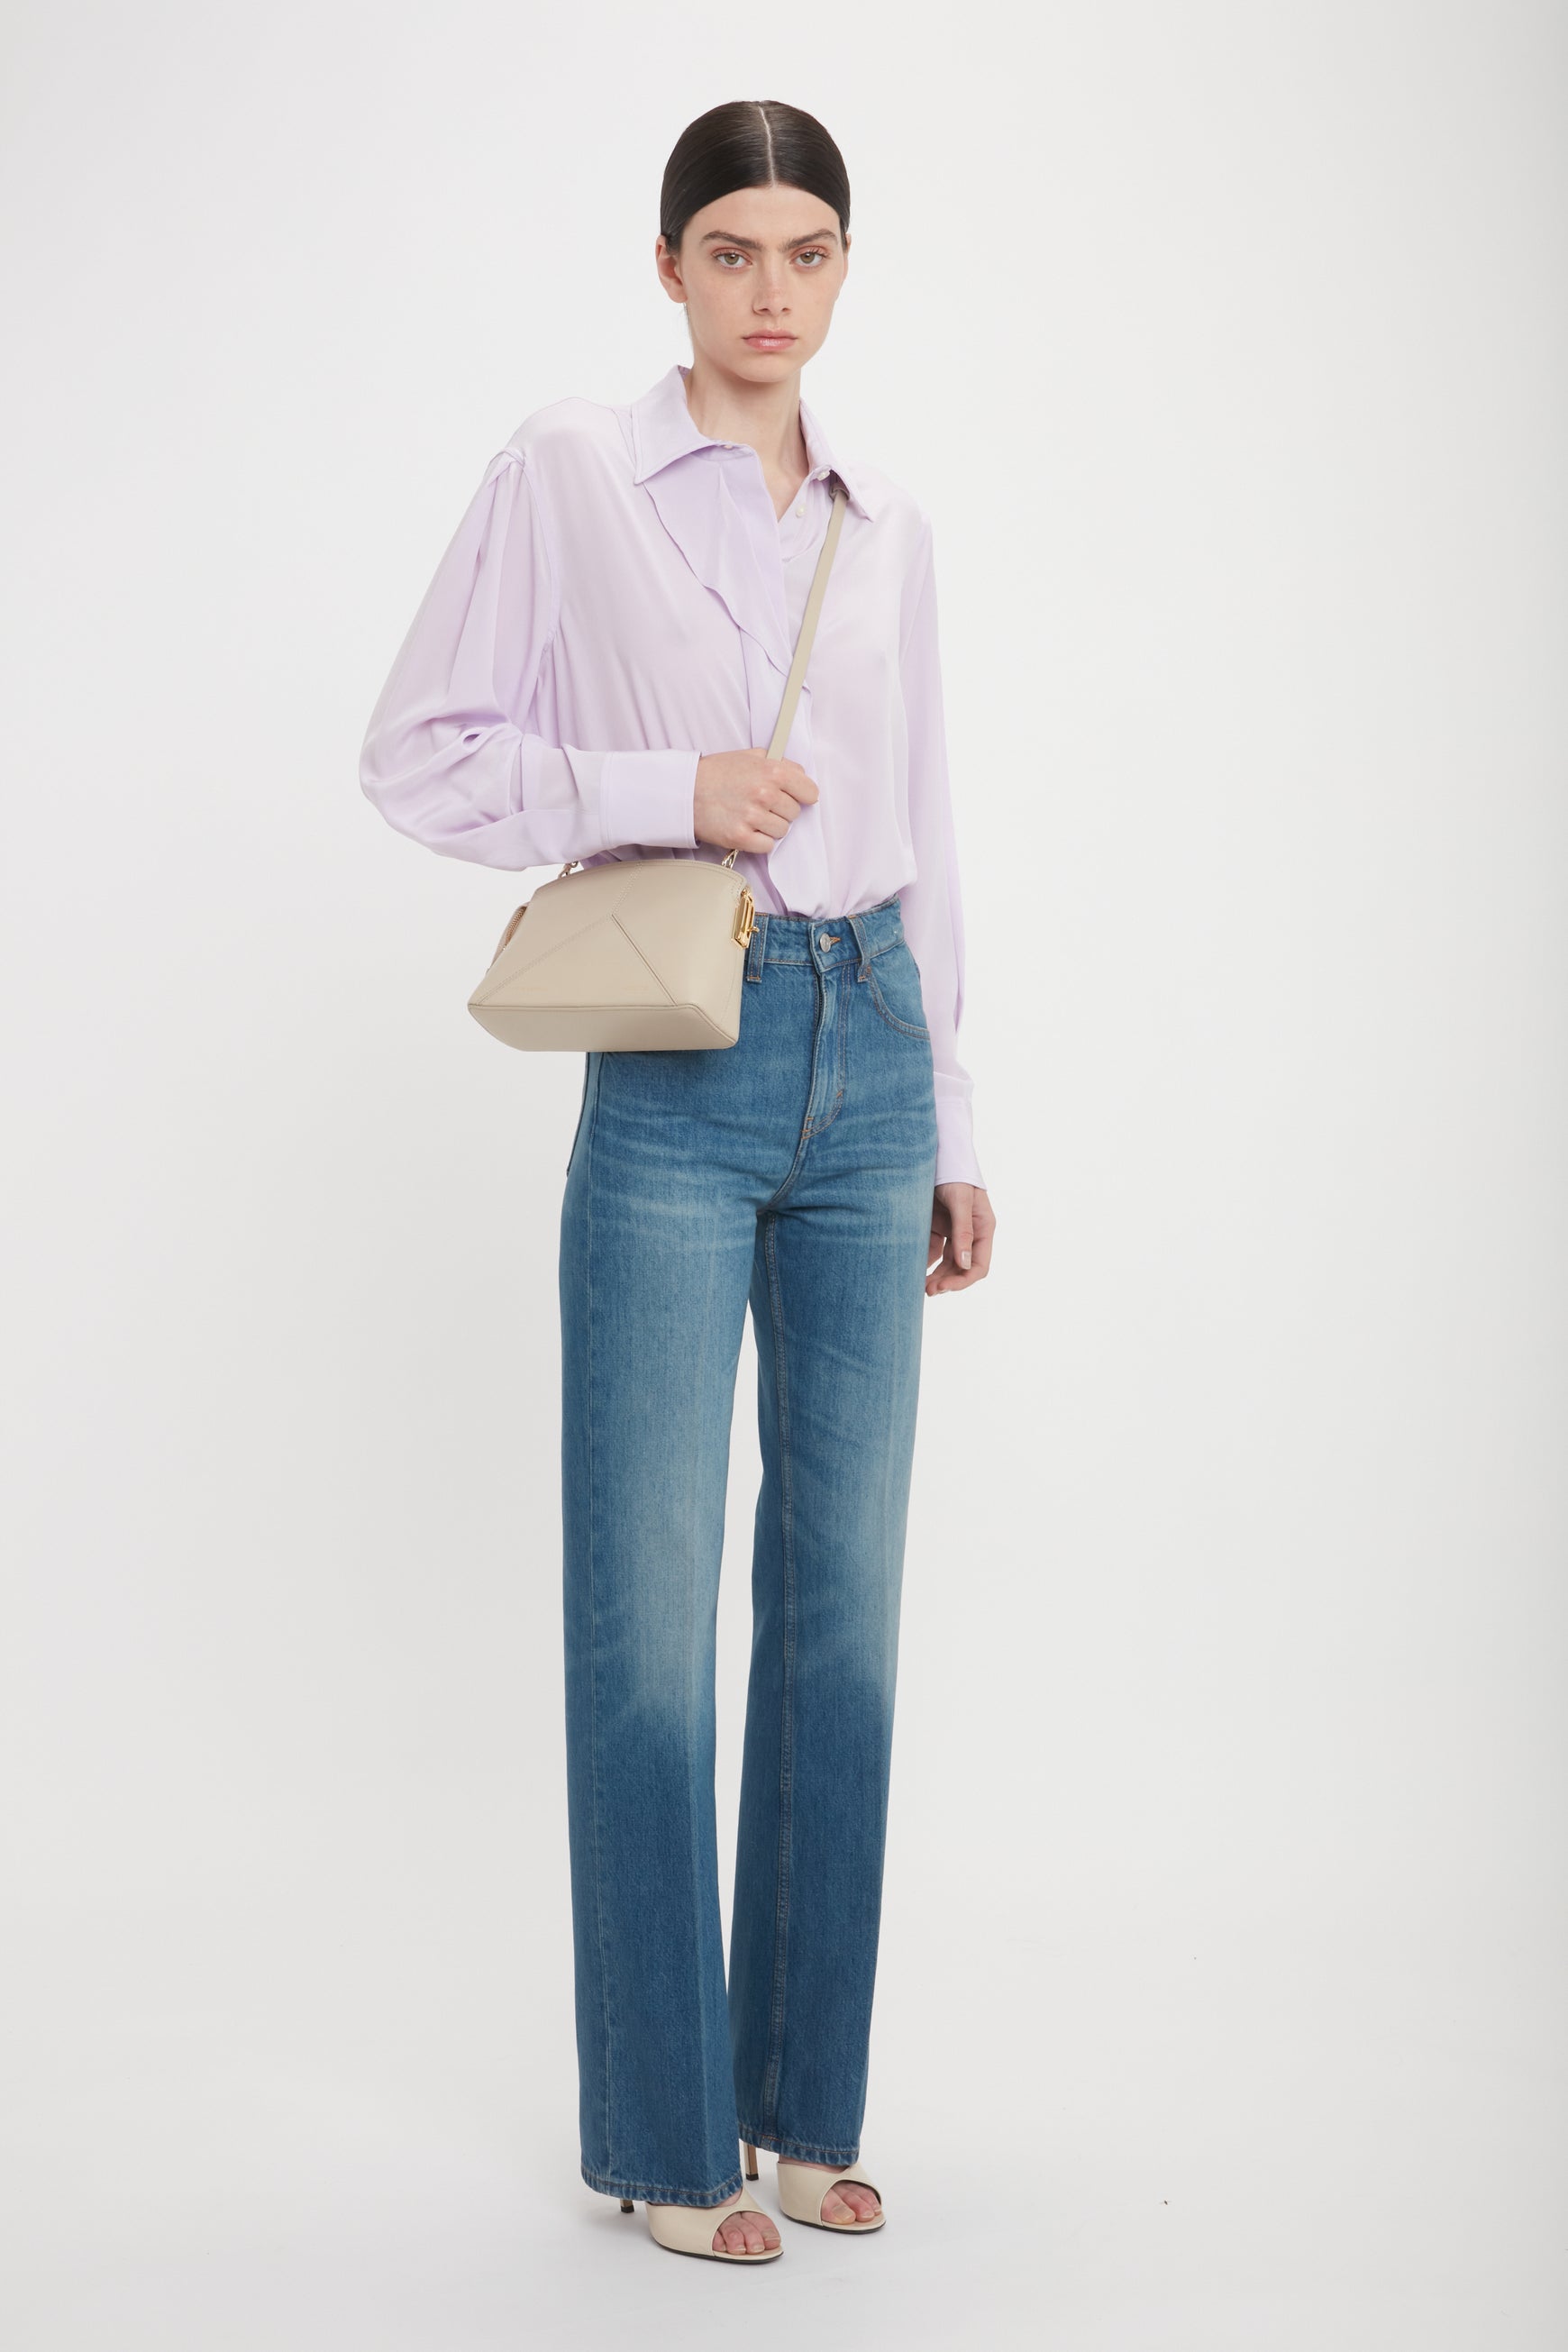 A person with long, dark hair in a middle part wears a light lavender blouse, high-waisted blue jeans, beige sandals, and carries a Victoria Beckham Victoria Crossbody Bag In Taupe Leather with an adjustable and removable strap, standing against a plain white background.